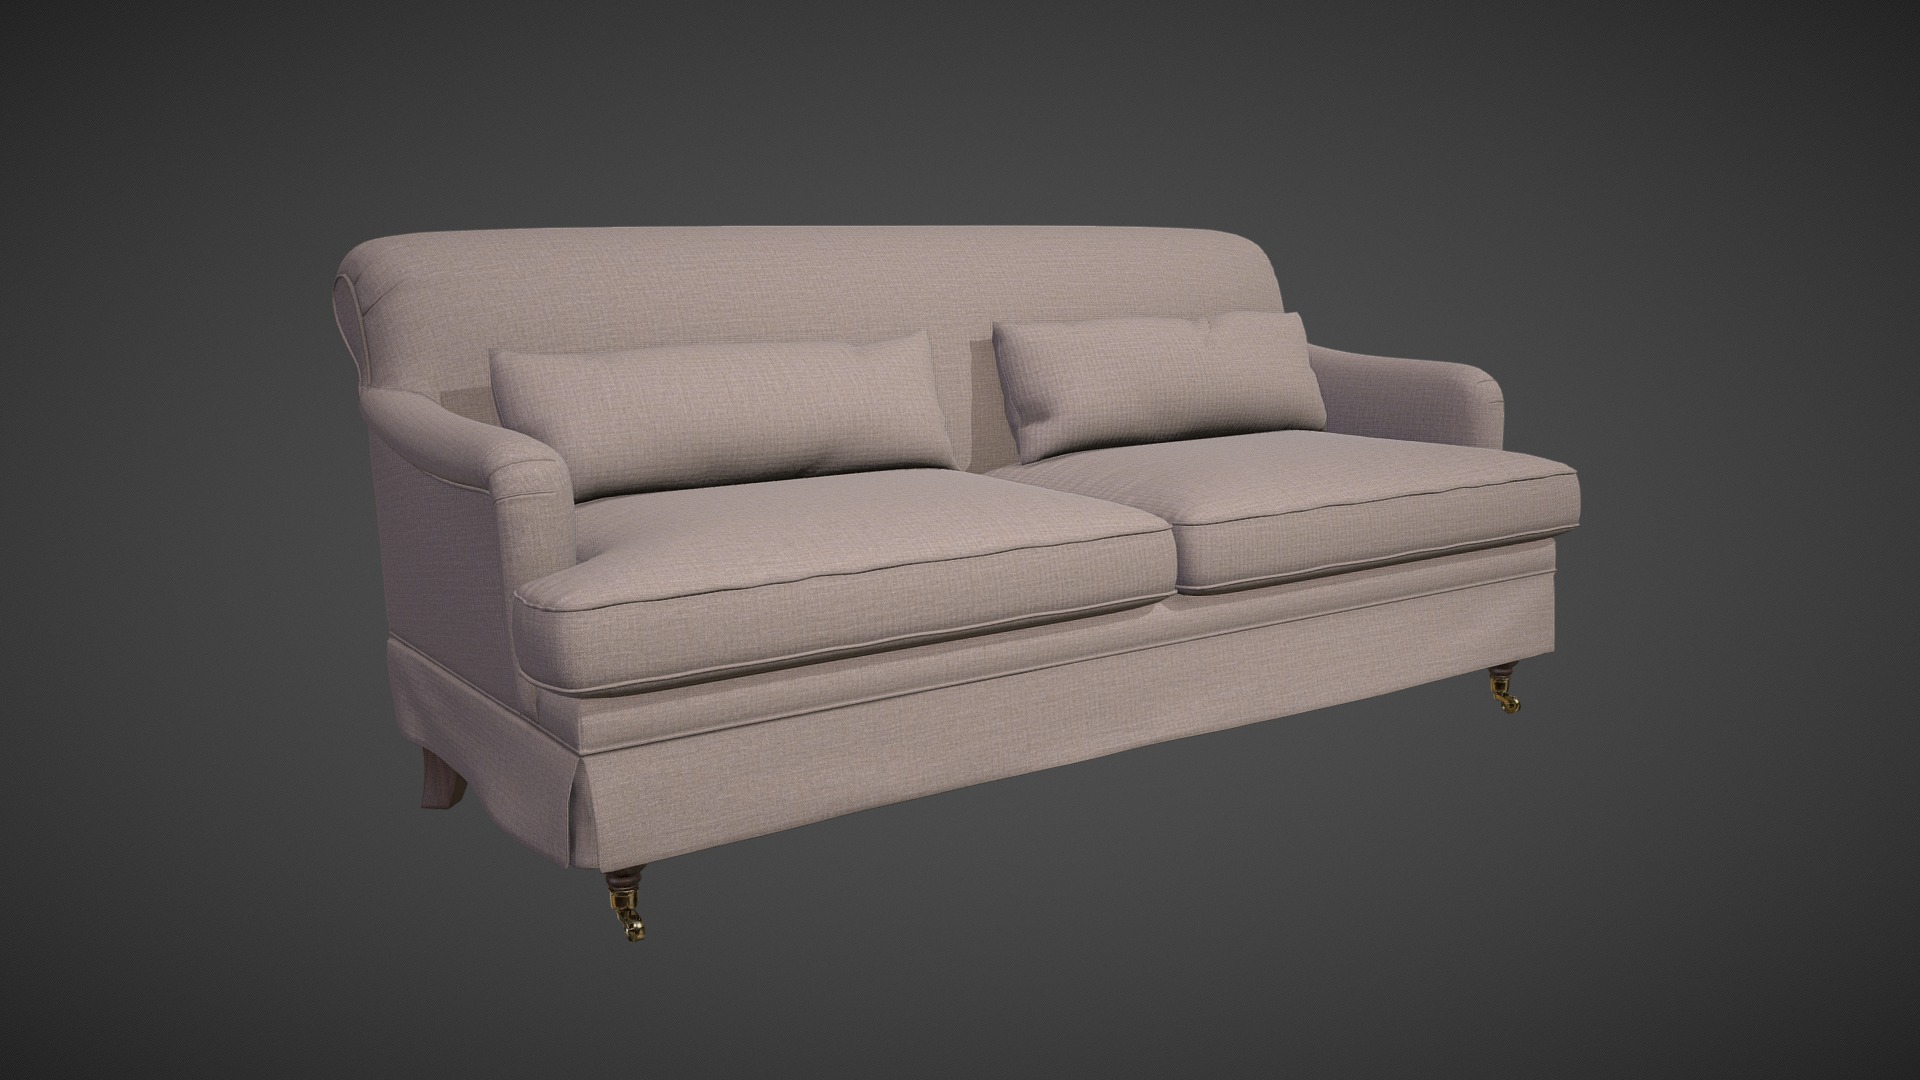 3D model Sofa Adhara - This is a 3D model of the Sofa Adhara. The 3D model is about a couch with a cushion.